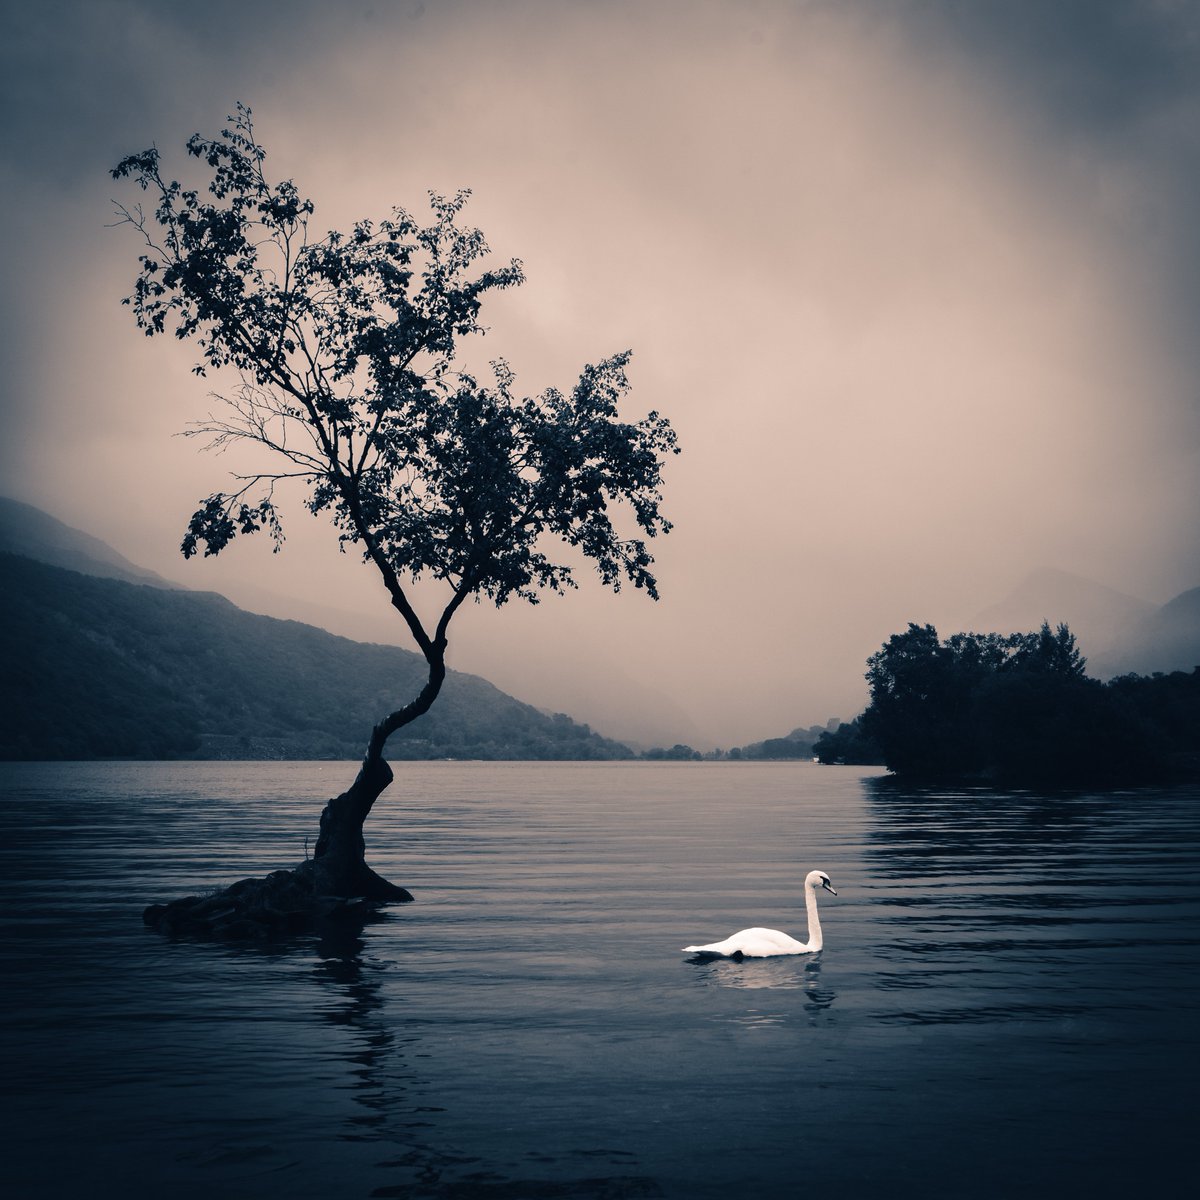 Probably my fav snap from our adventure to North Wales last weekend. Nice that the swan came to say #hello 😄

#picoftheday #swan #lake #lonetree #tree #blackandwhite #blackandwhitephotography #tranquil #bluehour #landscapephotography #visitsnowdonia #visitwales